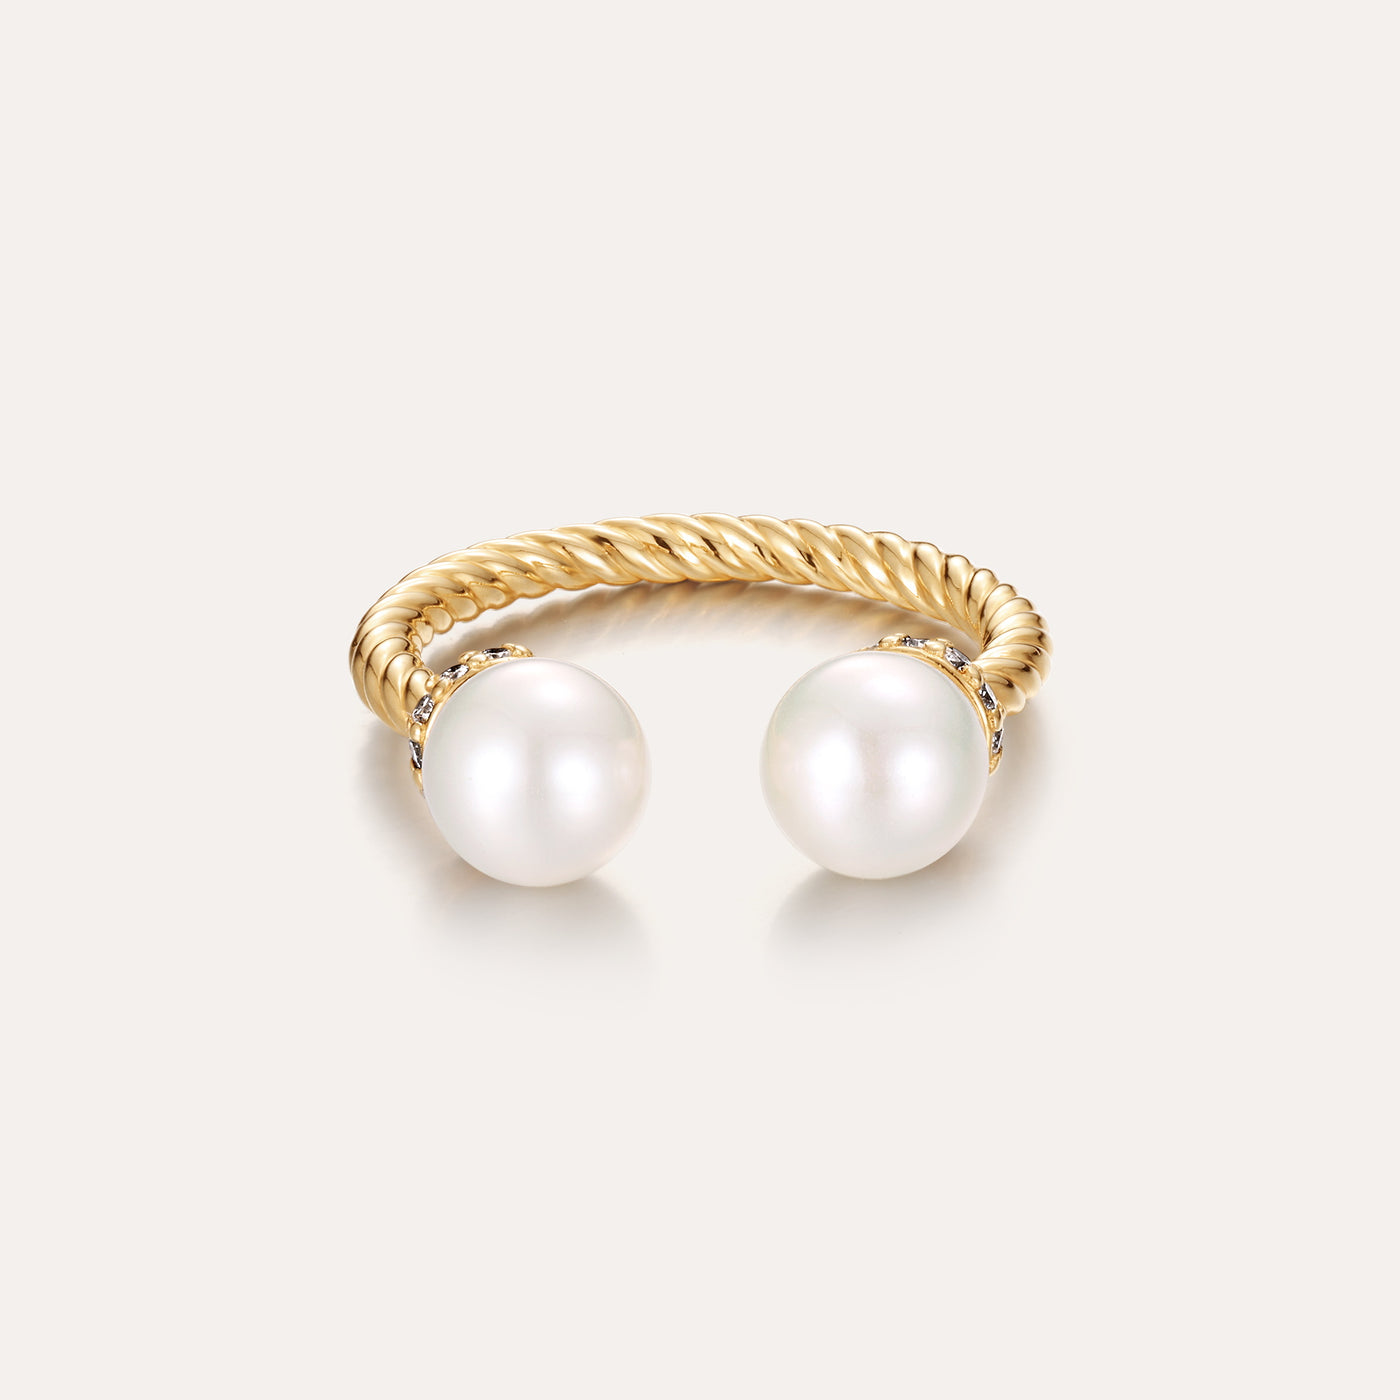 Twine Diamond Open Ring with Pearls